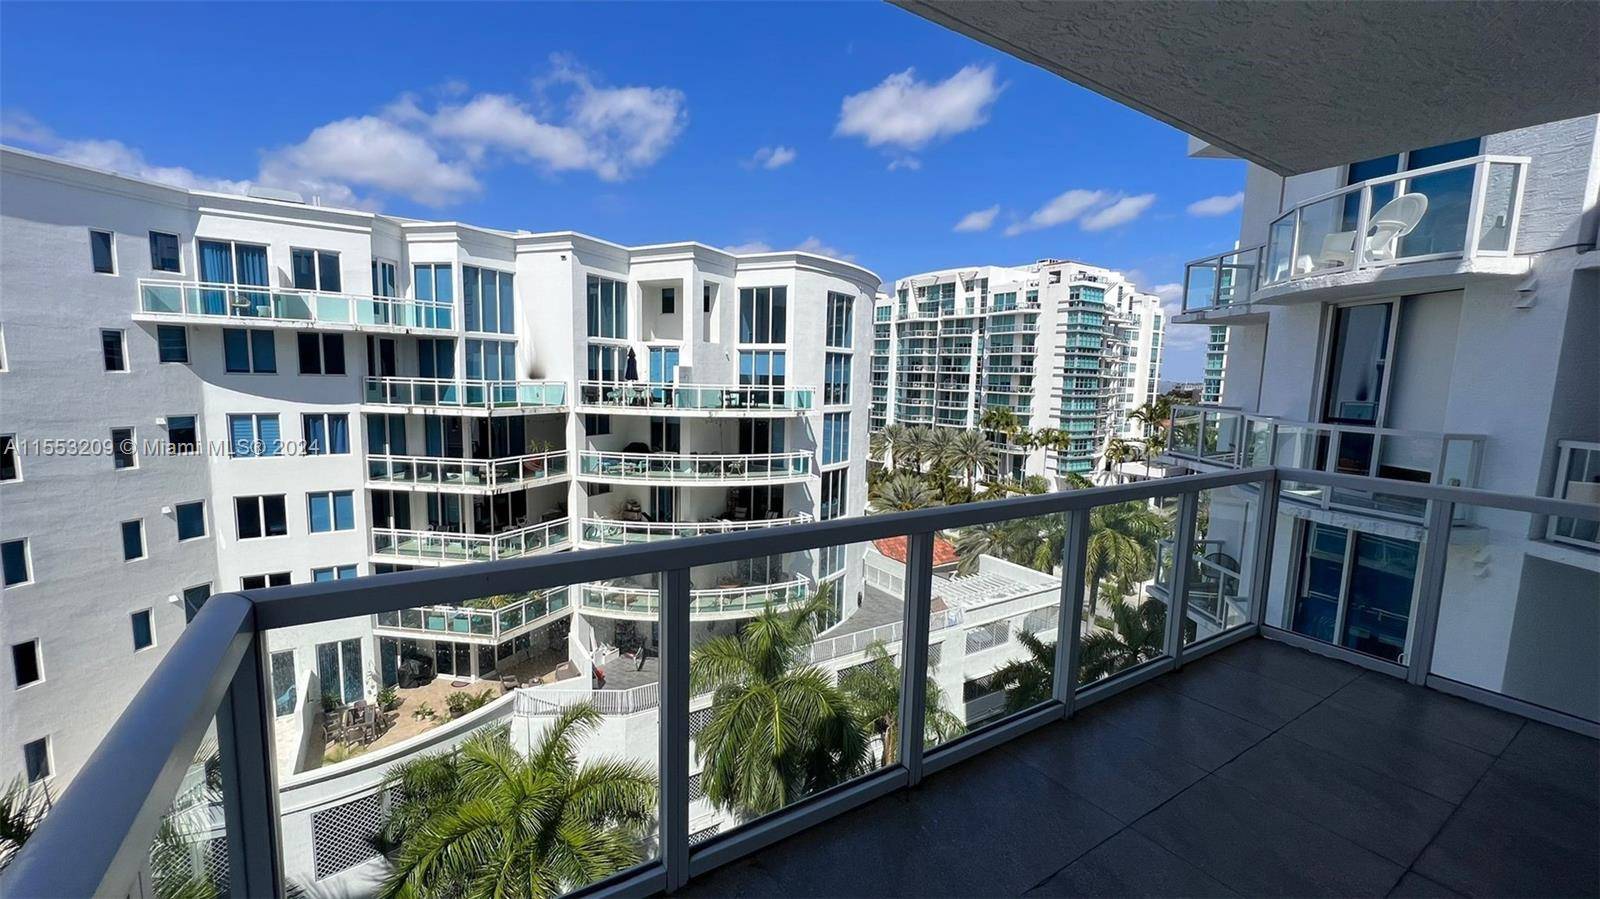 Beautiful 2 2 spacious condo with canal view.